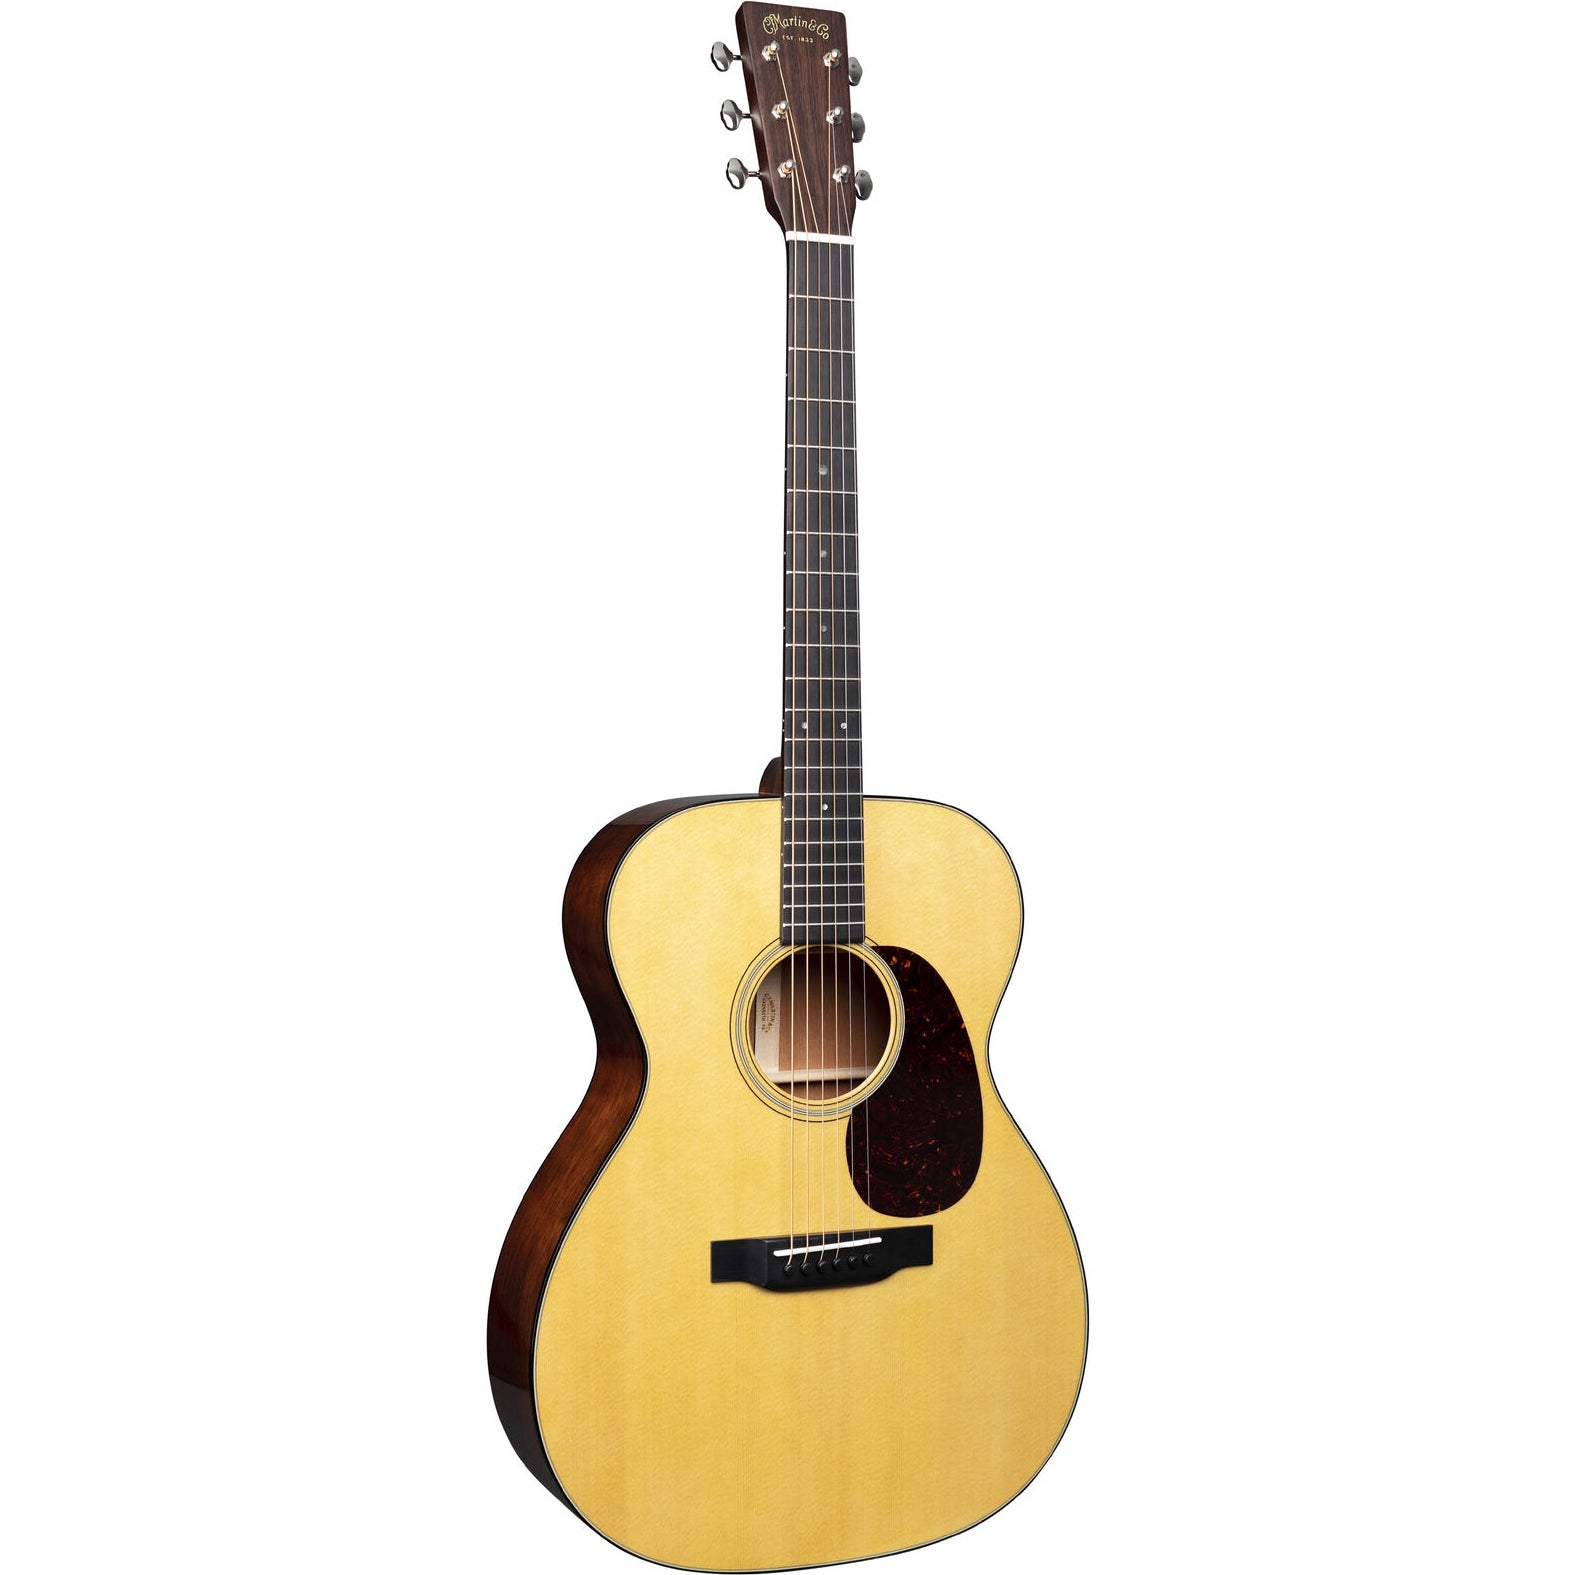 Martin 000-18 6-string Acoustic Guitar w/ Sitka Spruce Top, Mahogany Back  and Sides, Natural